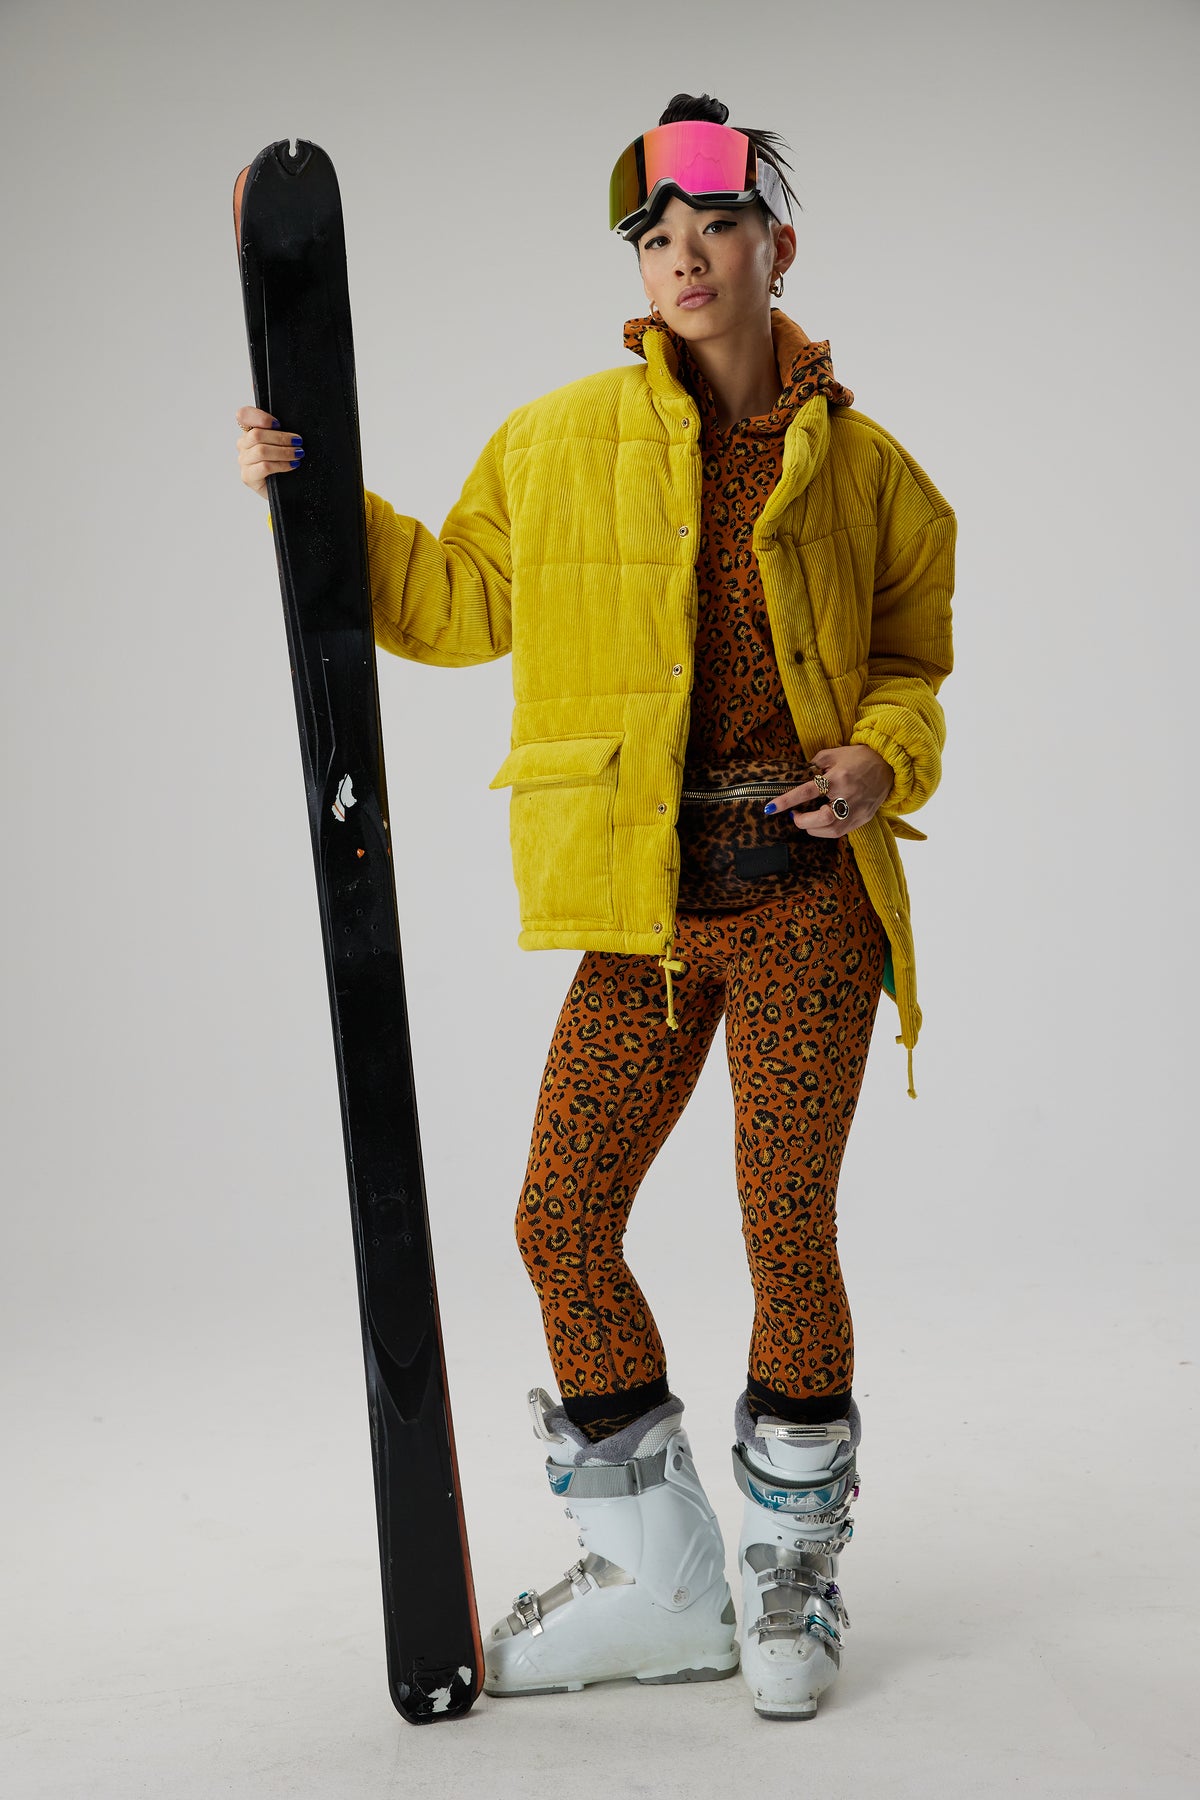 Donna puffed jacket in Yellow Cab